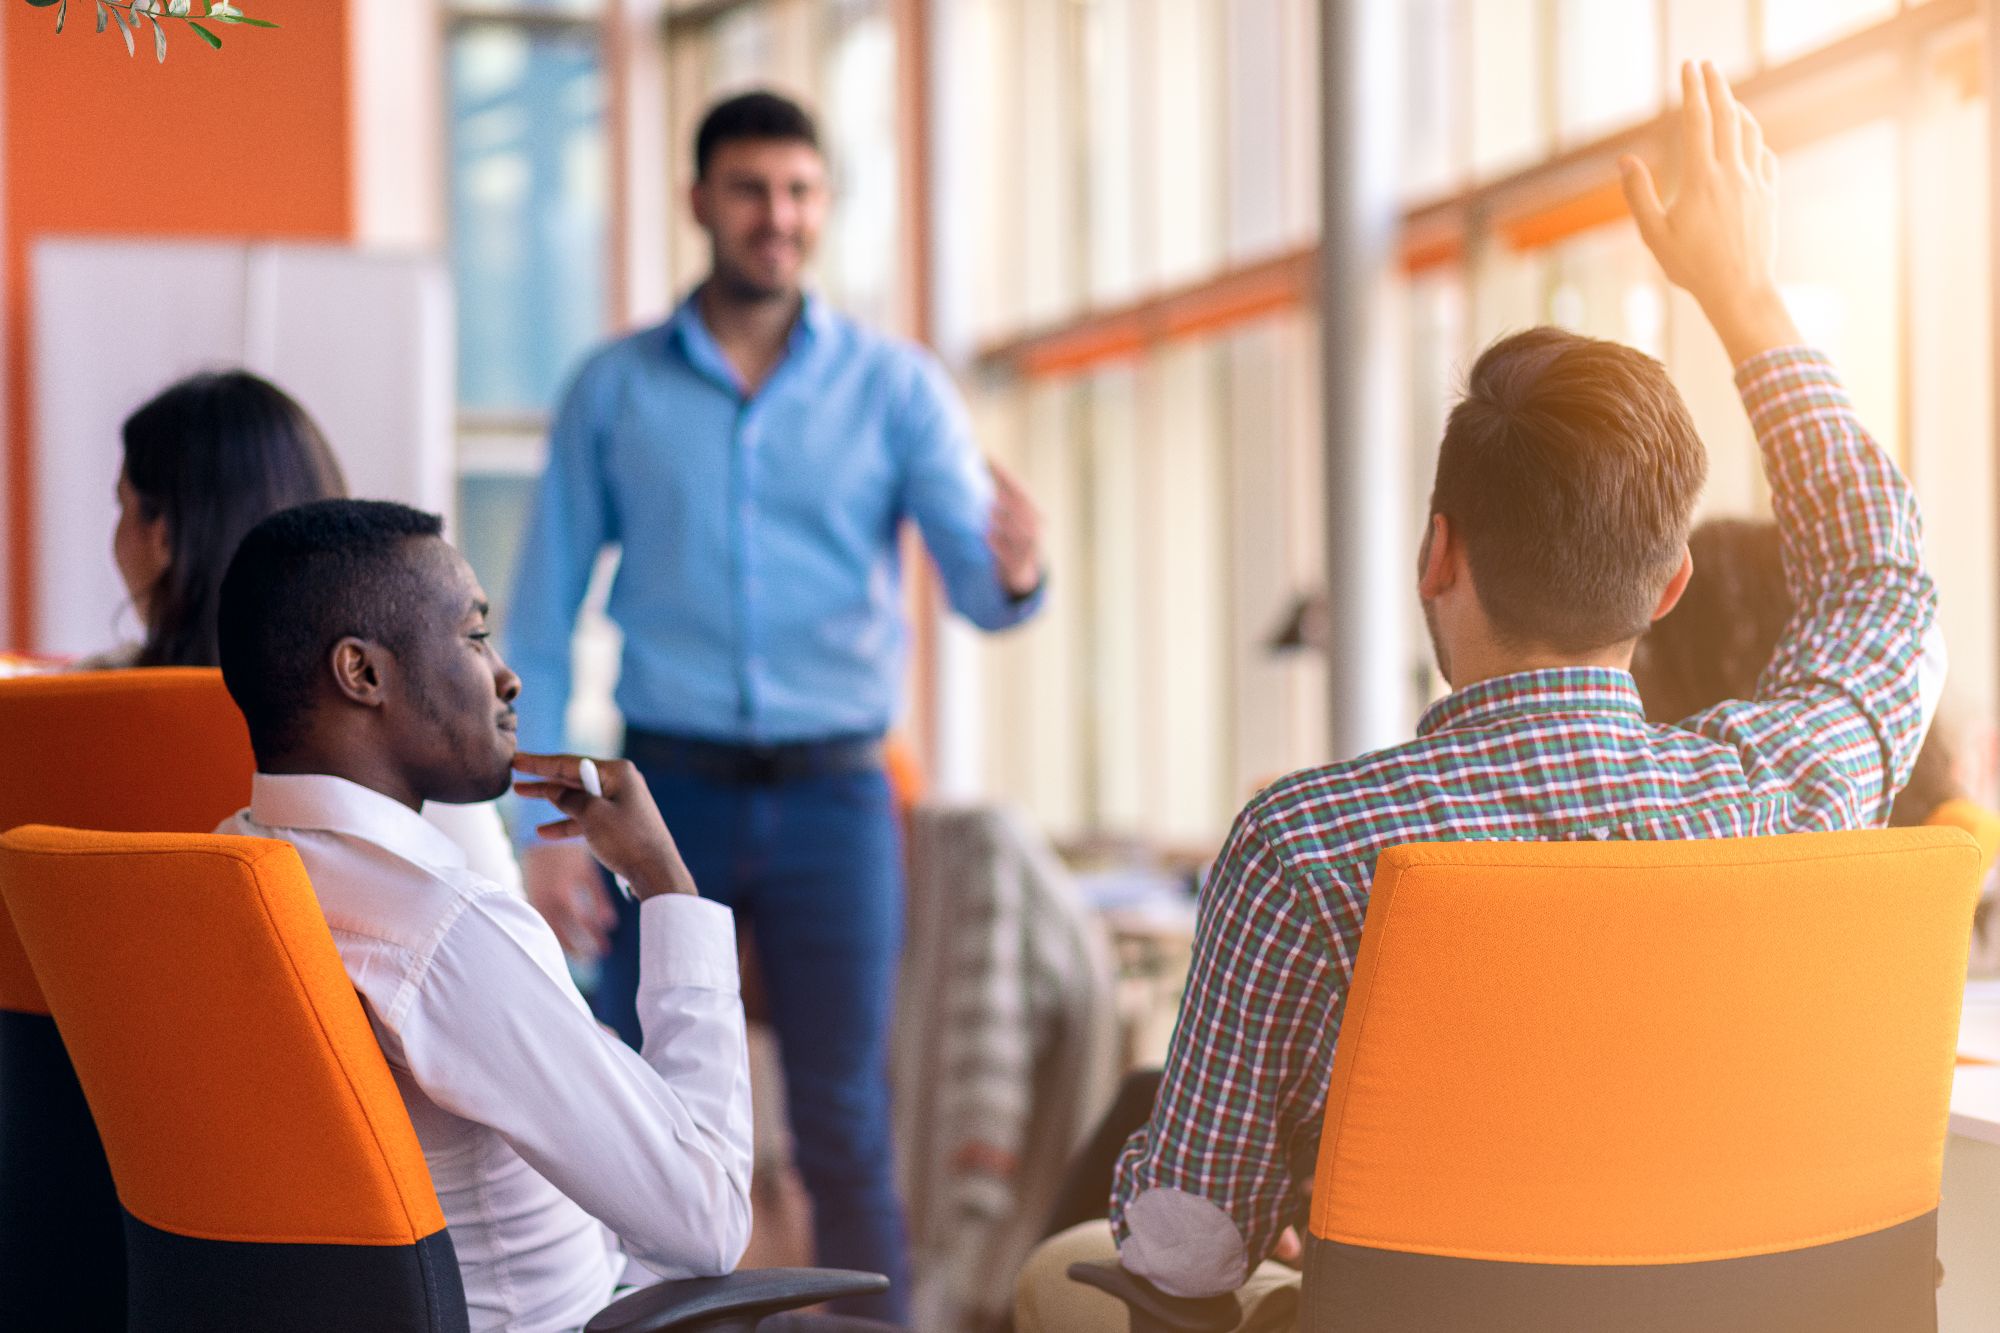 5 Reasons Why You Should Consider Sales Training For Your Team